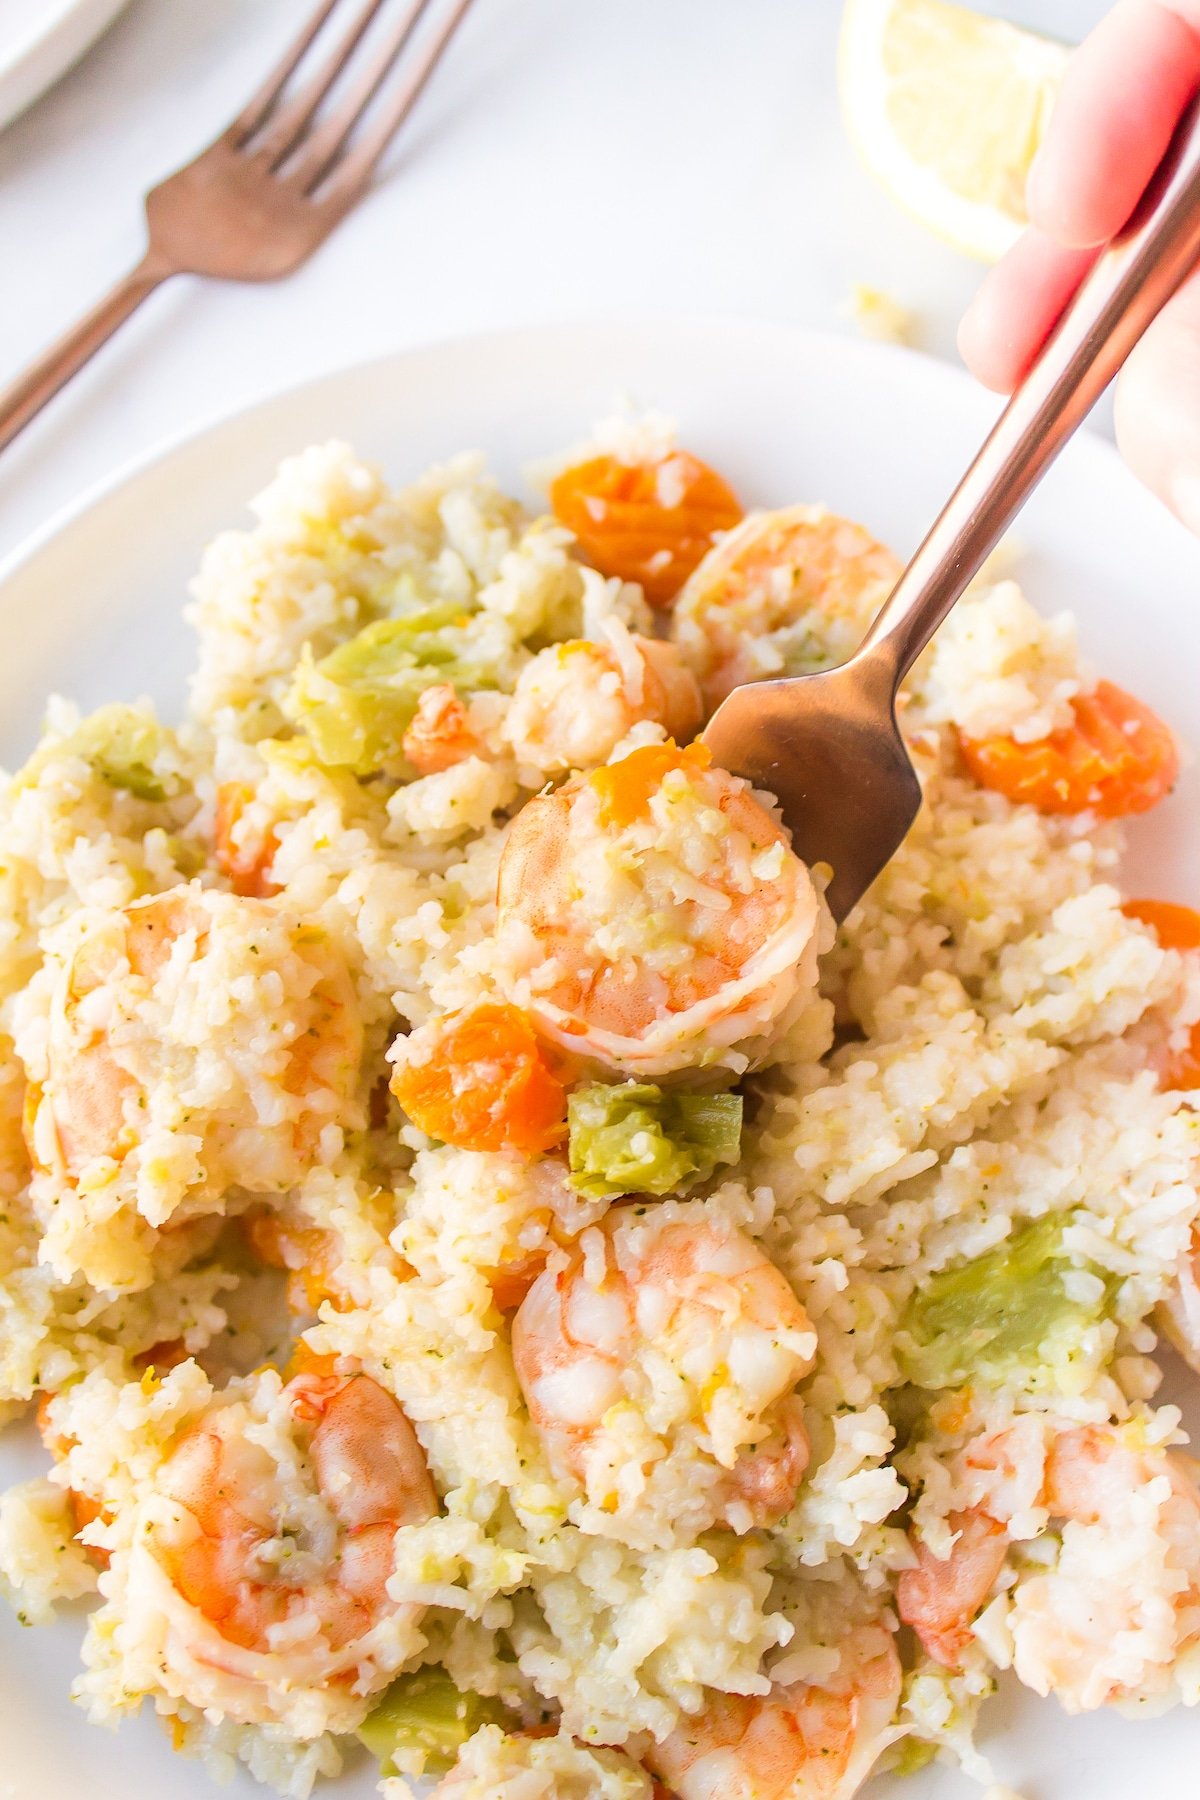 Instant Pot Rice and Shrimp on a white dinner plate.